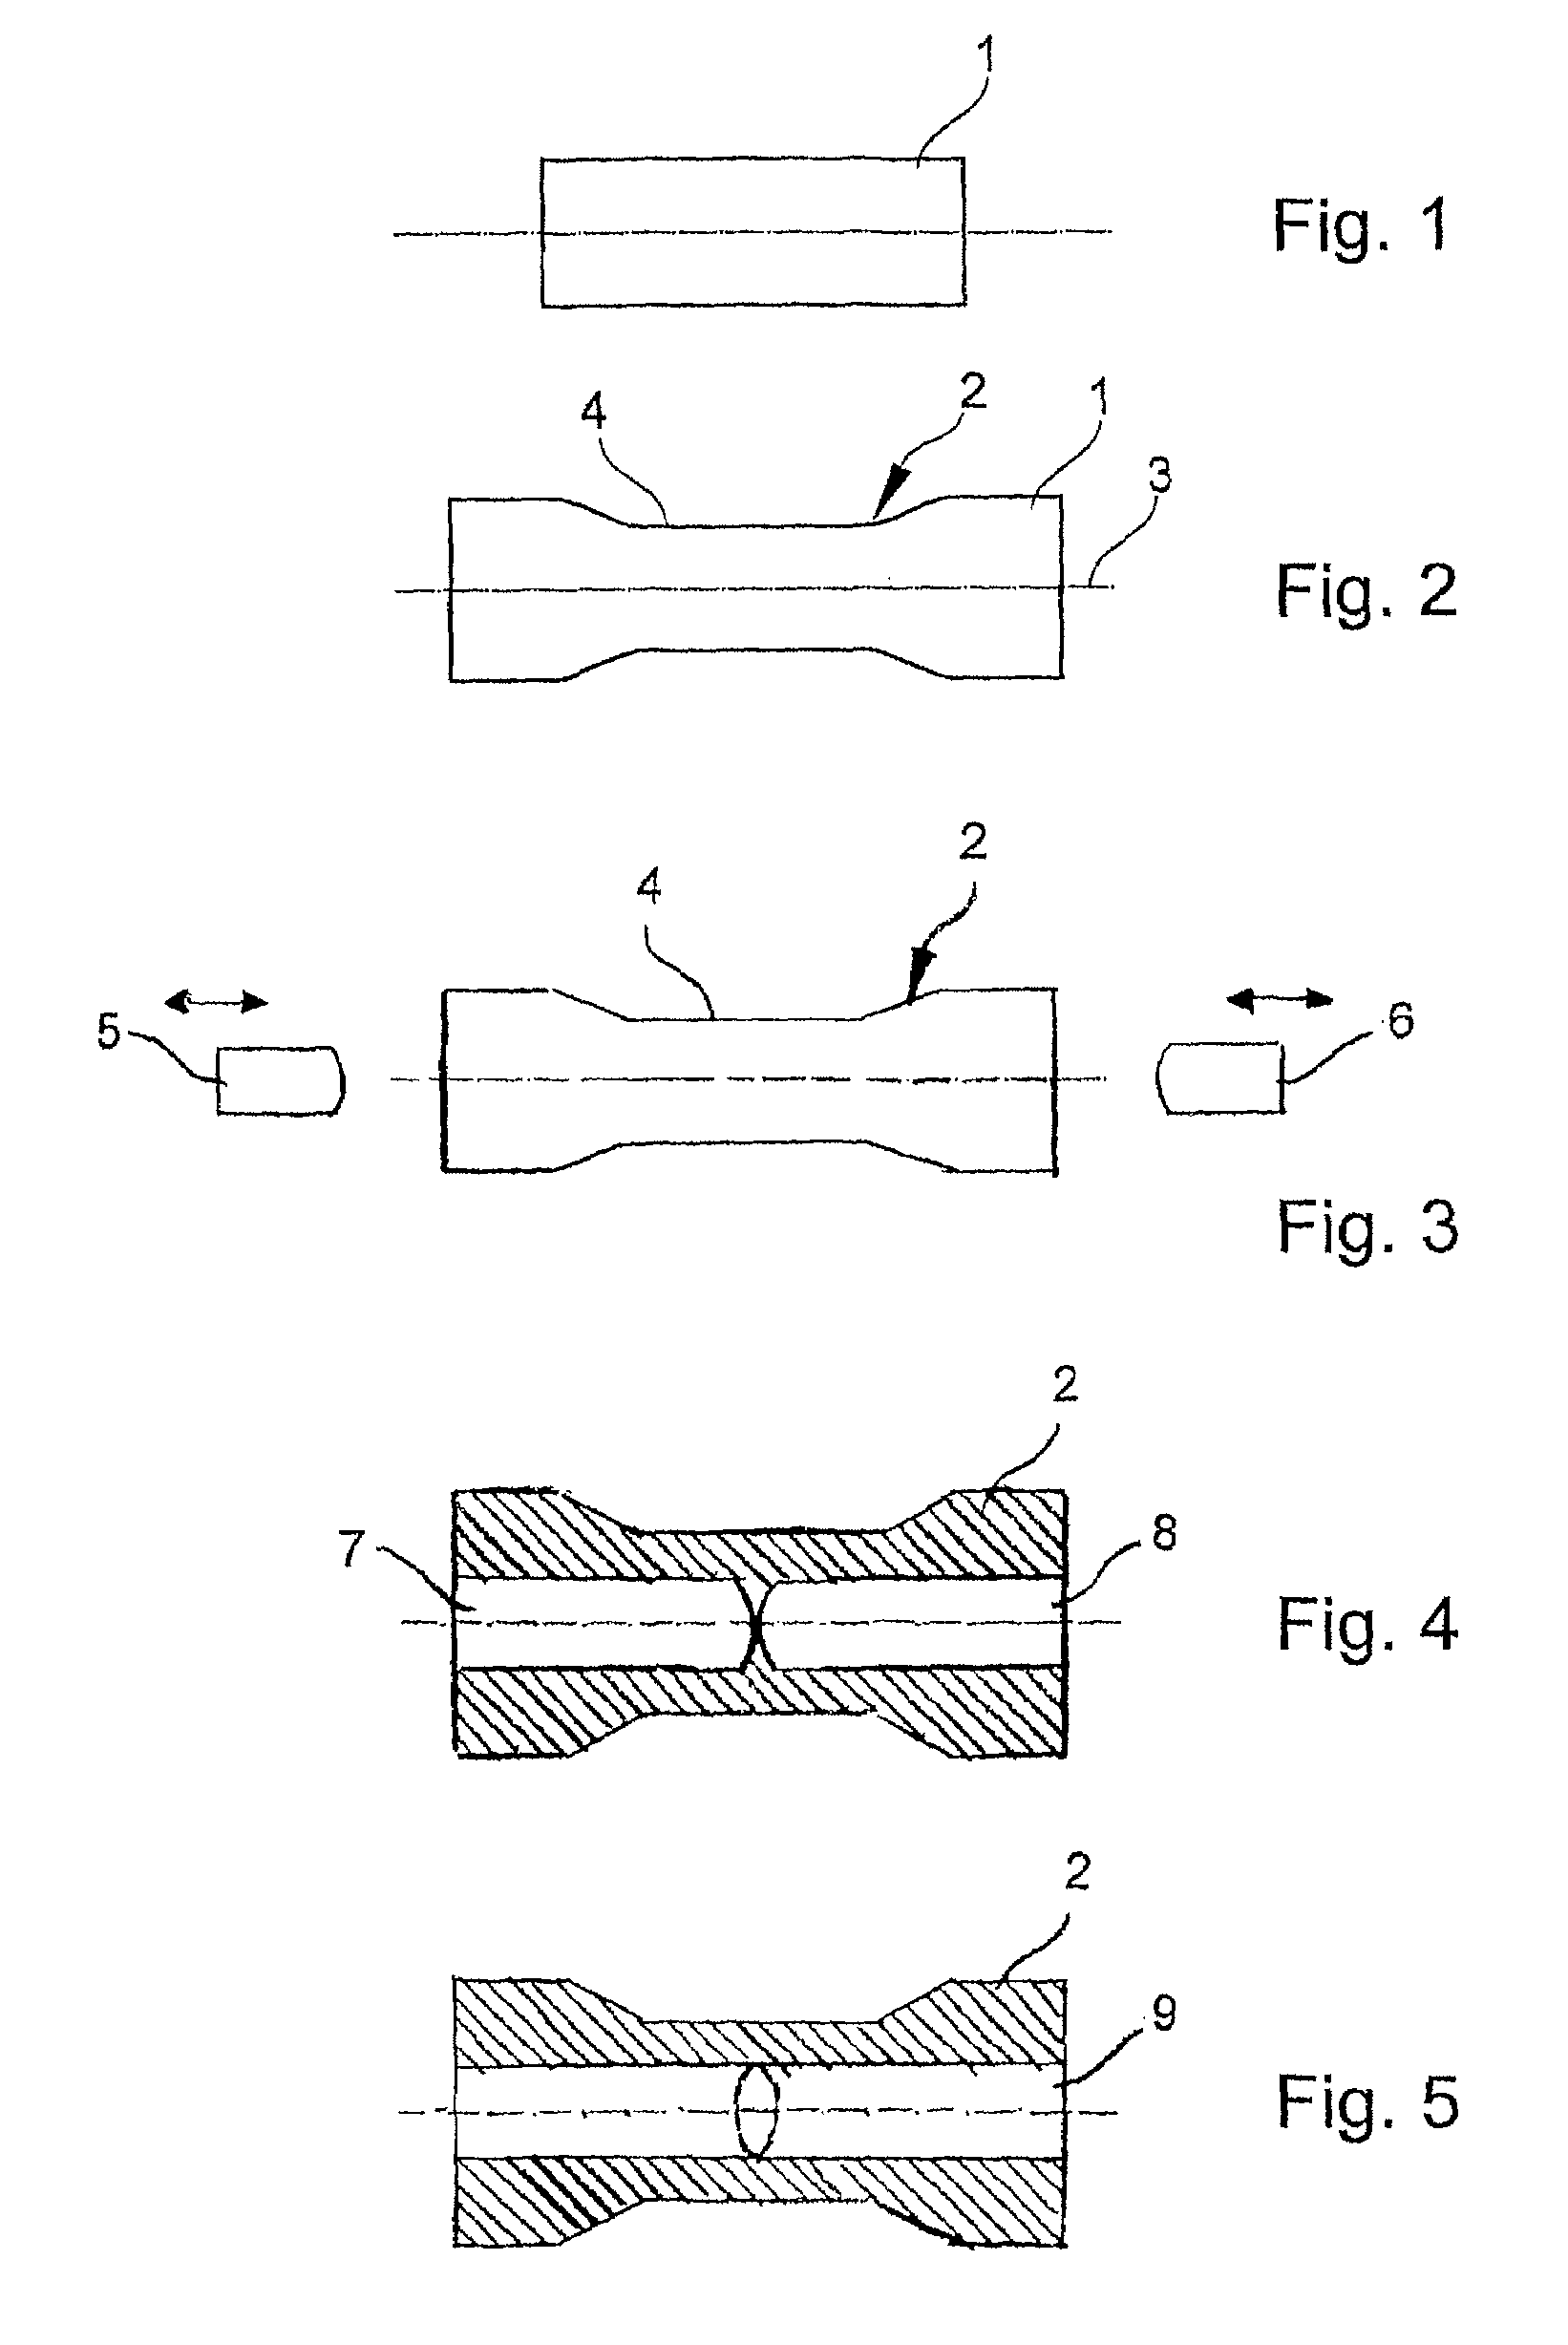 Method for the production of a rotationally symmetrical part, and part produced according to said method